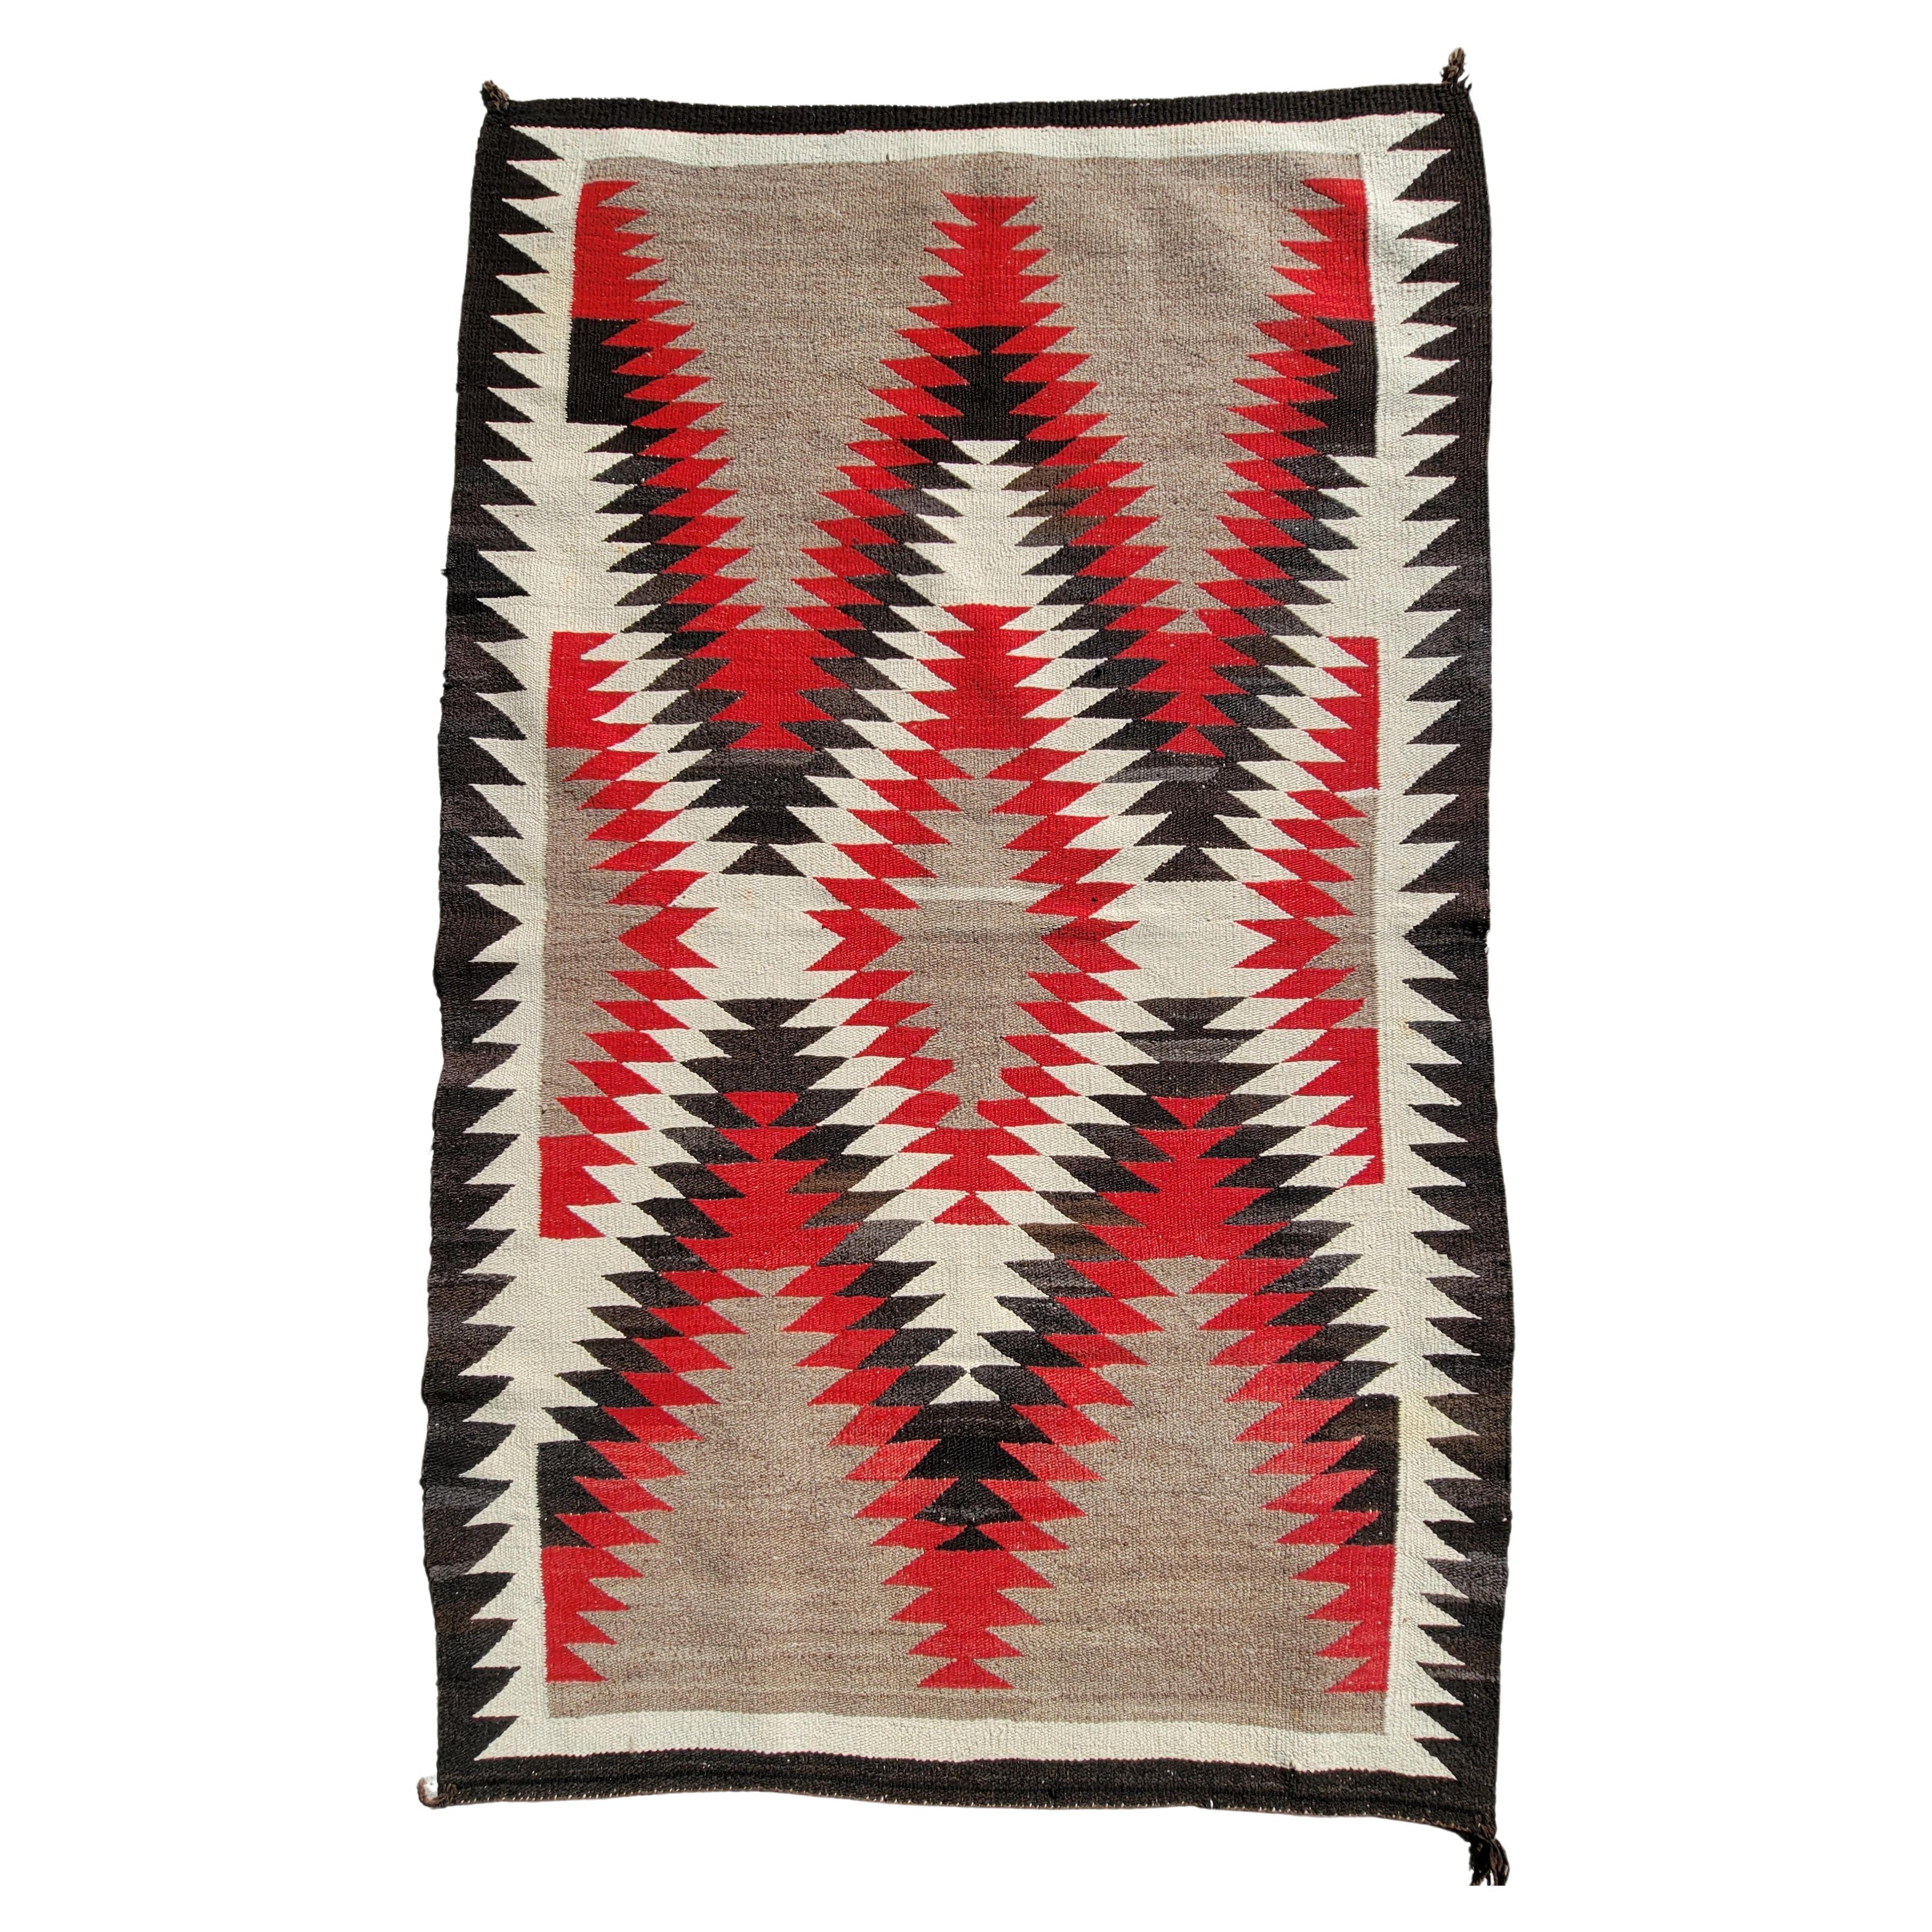 Why are Navajo rugs so expensive?